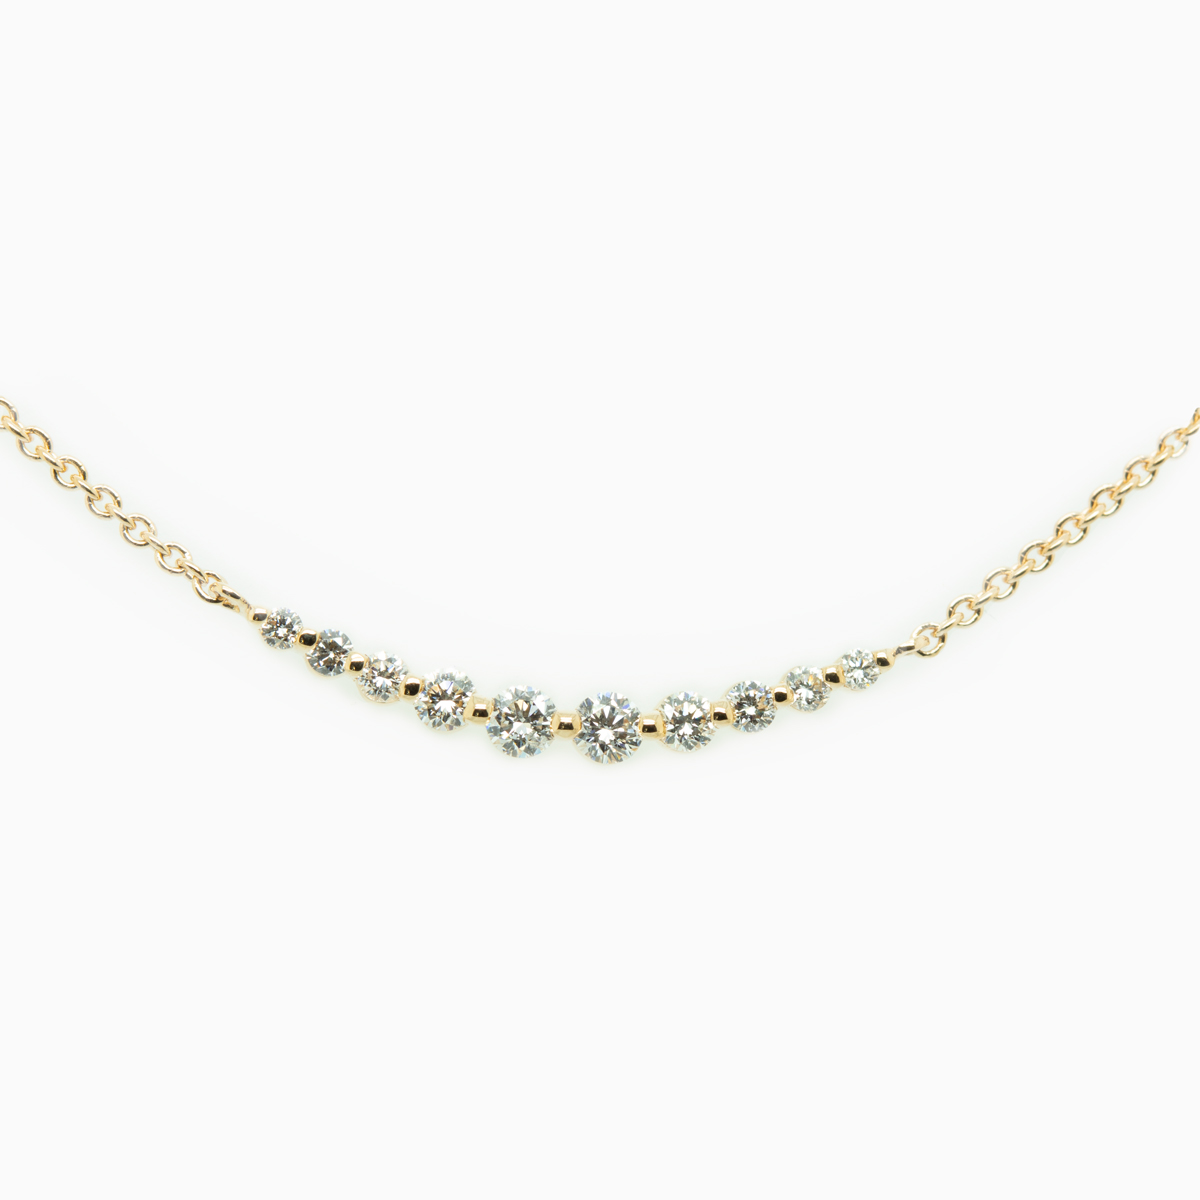 Diamond Curved Bar Necklace, 14k Yellow Gold